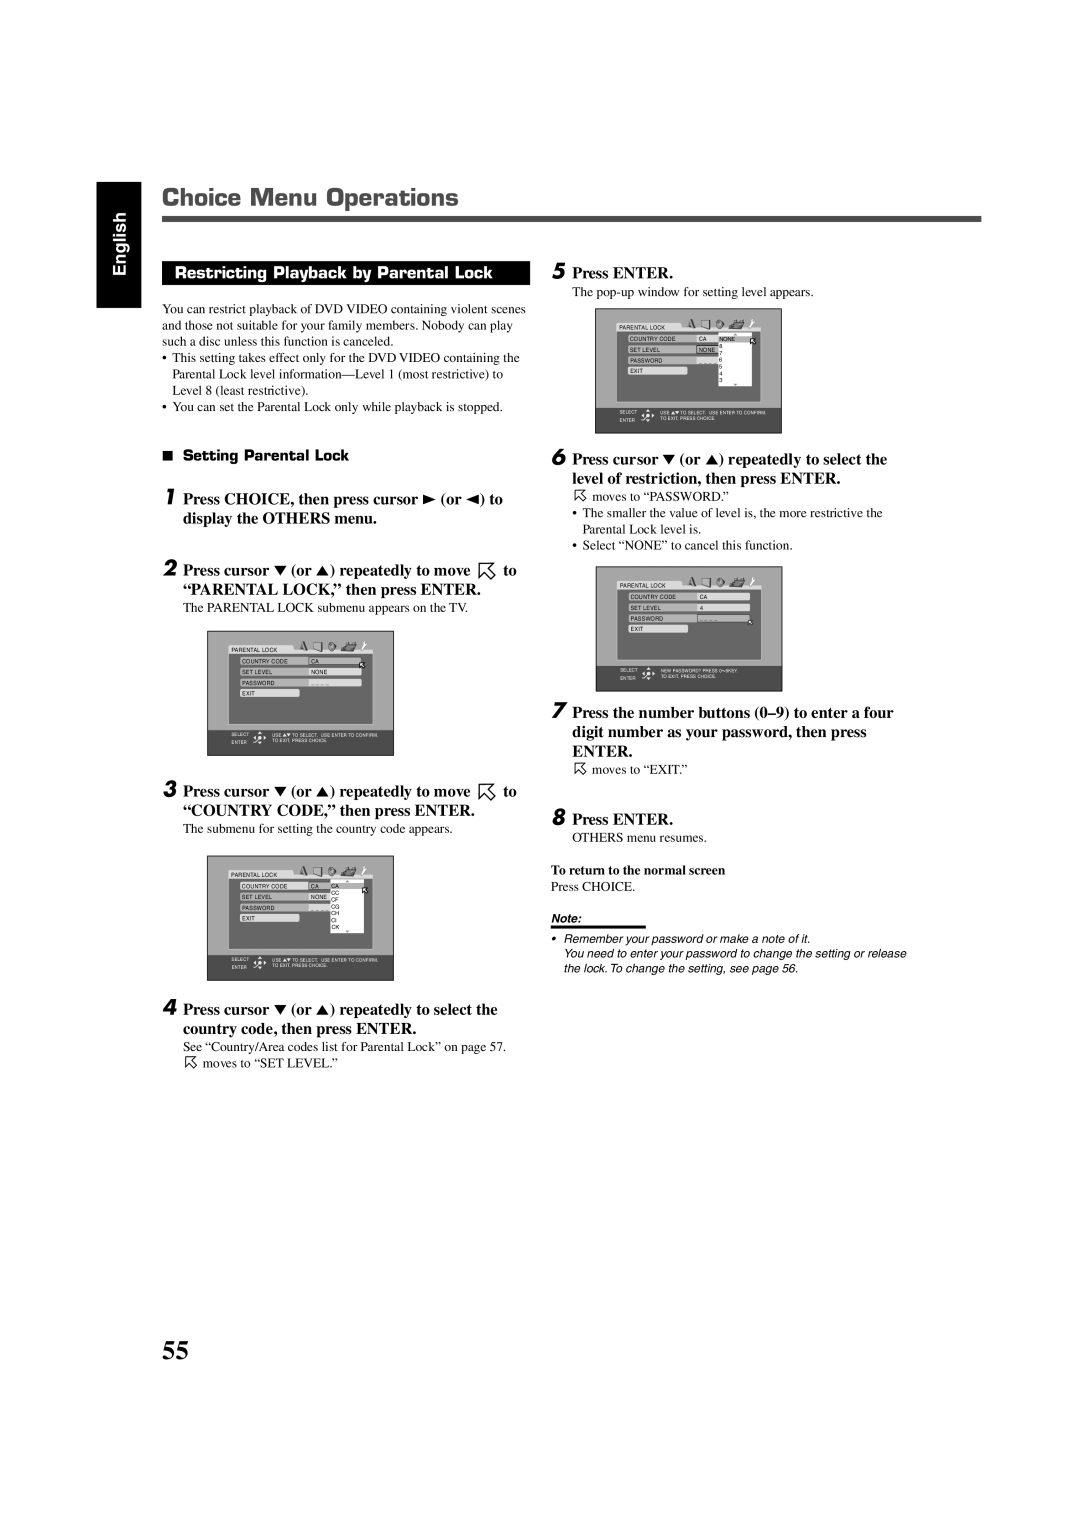 JVC RX-DV5SL manual Restricting Playback by Parental Lock, Press ENTER, 2Press cursor ∞ or 5 repeatedly to move to, Enter 